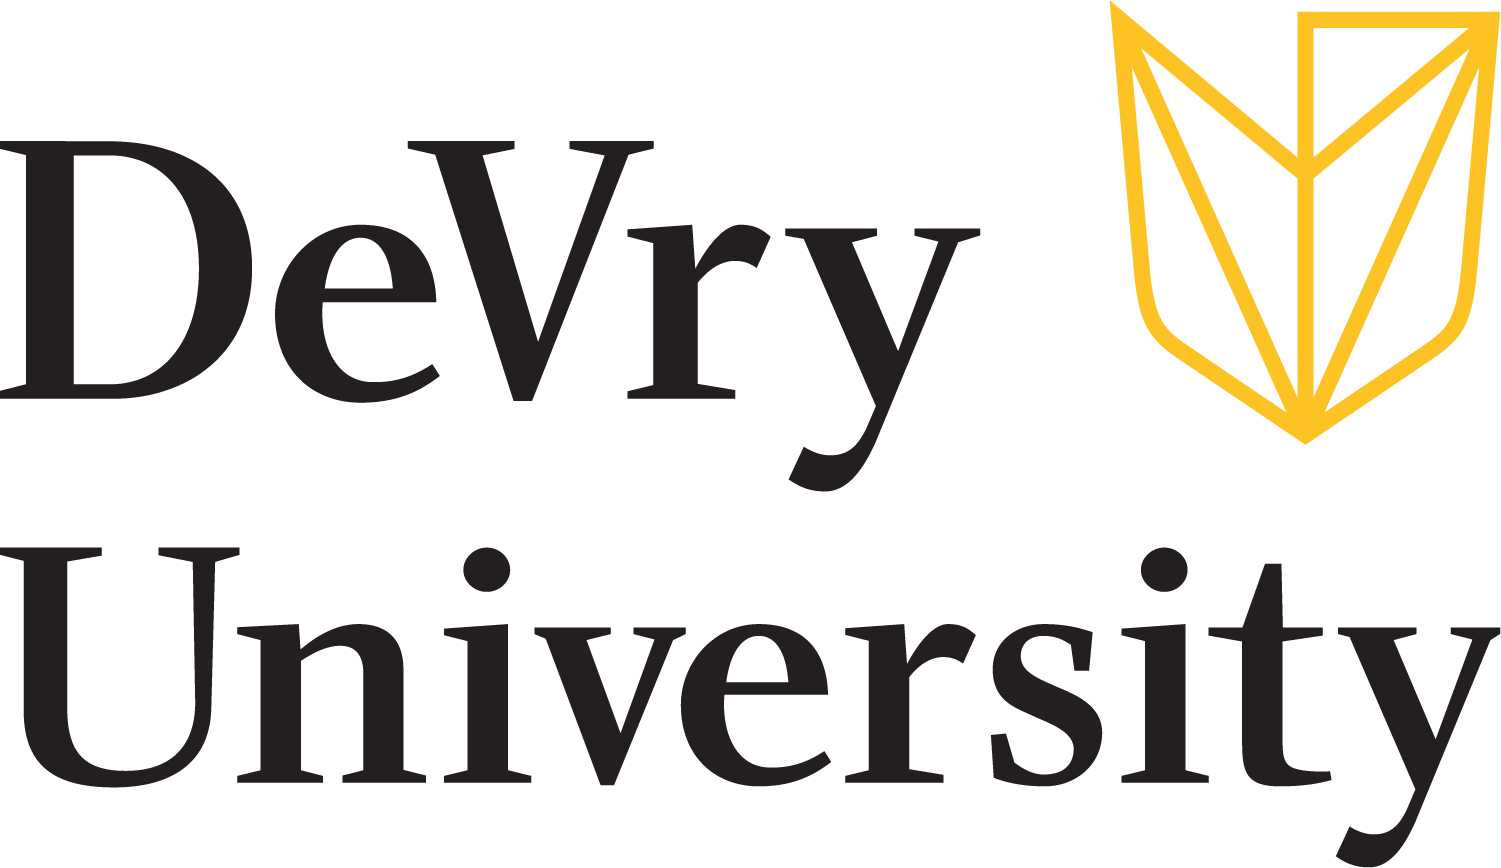 More courses from DeVry University